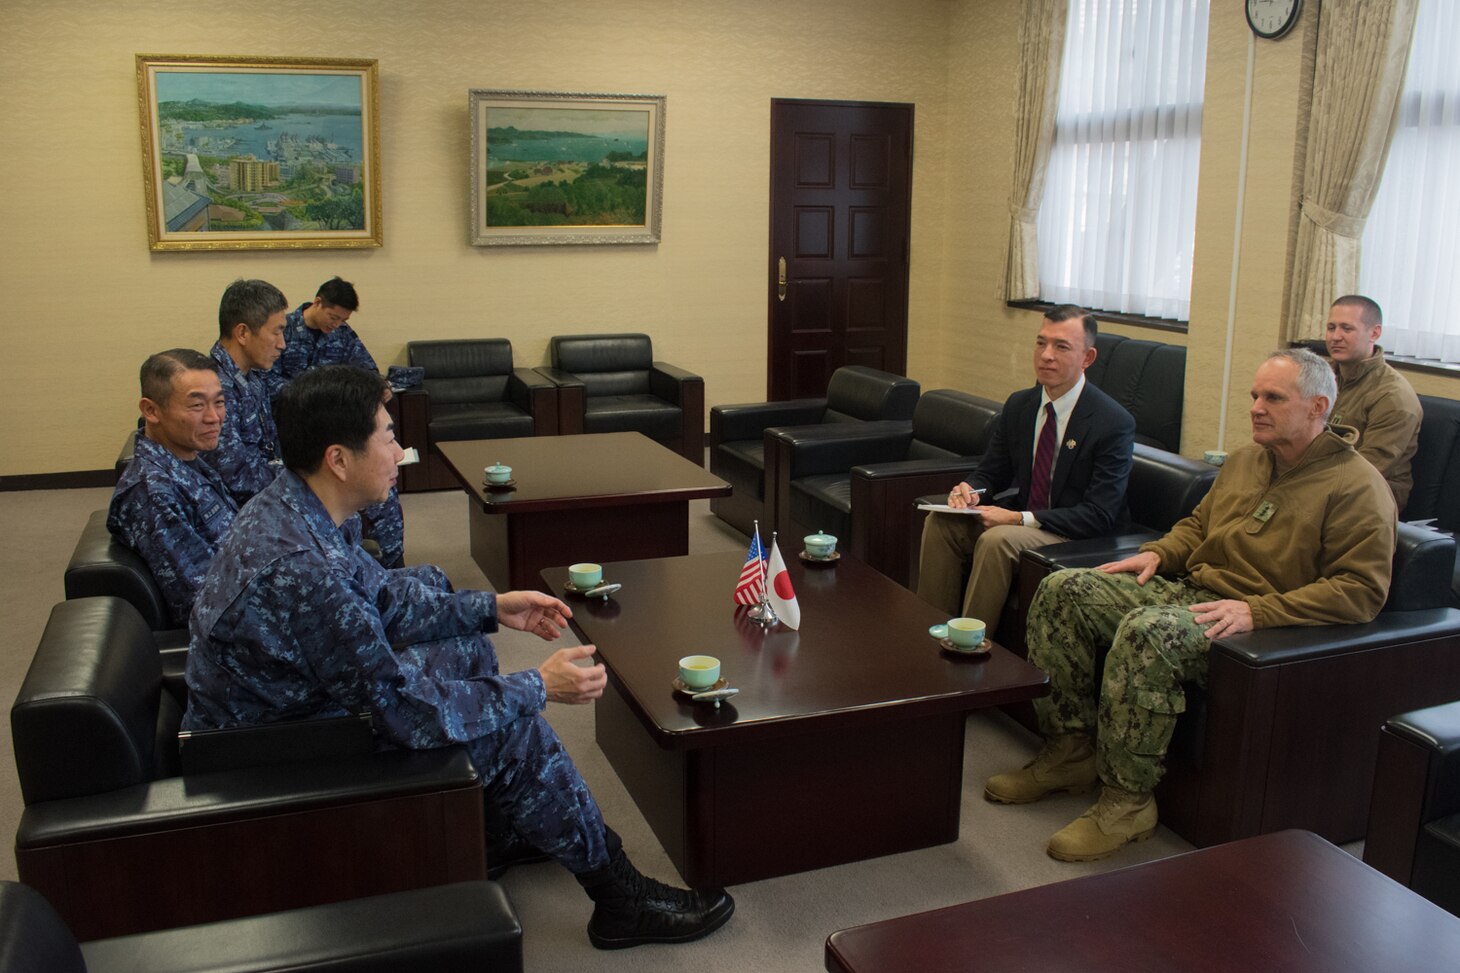 SASEBO, Japan (Jan. 9, 2019) Vice Adm. Phil Sawyer, the U.S. 7th Fleet commander, attends an office call with Vice Adm. Satoshi Kikuchi (front), the Japan Maritime Self-Defense Force (JMSDF) Sasebo District Headquarters commandant, and Rear Adm. Kenjo Sato (back), the JMSDF Sasebo District Headquarters chief of staff. Sawyer was in Sasebo to make a waterfront visit to forward deployed naval forces operating out of Fleet Activities Sasebo, Japan.